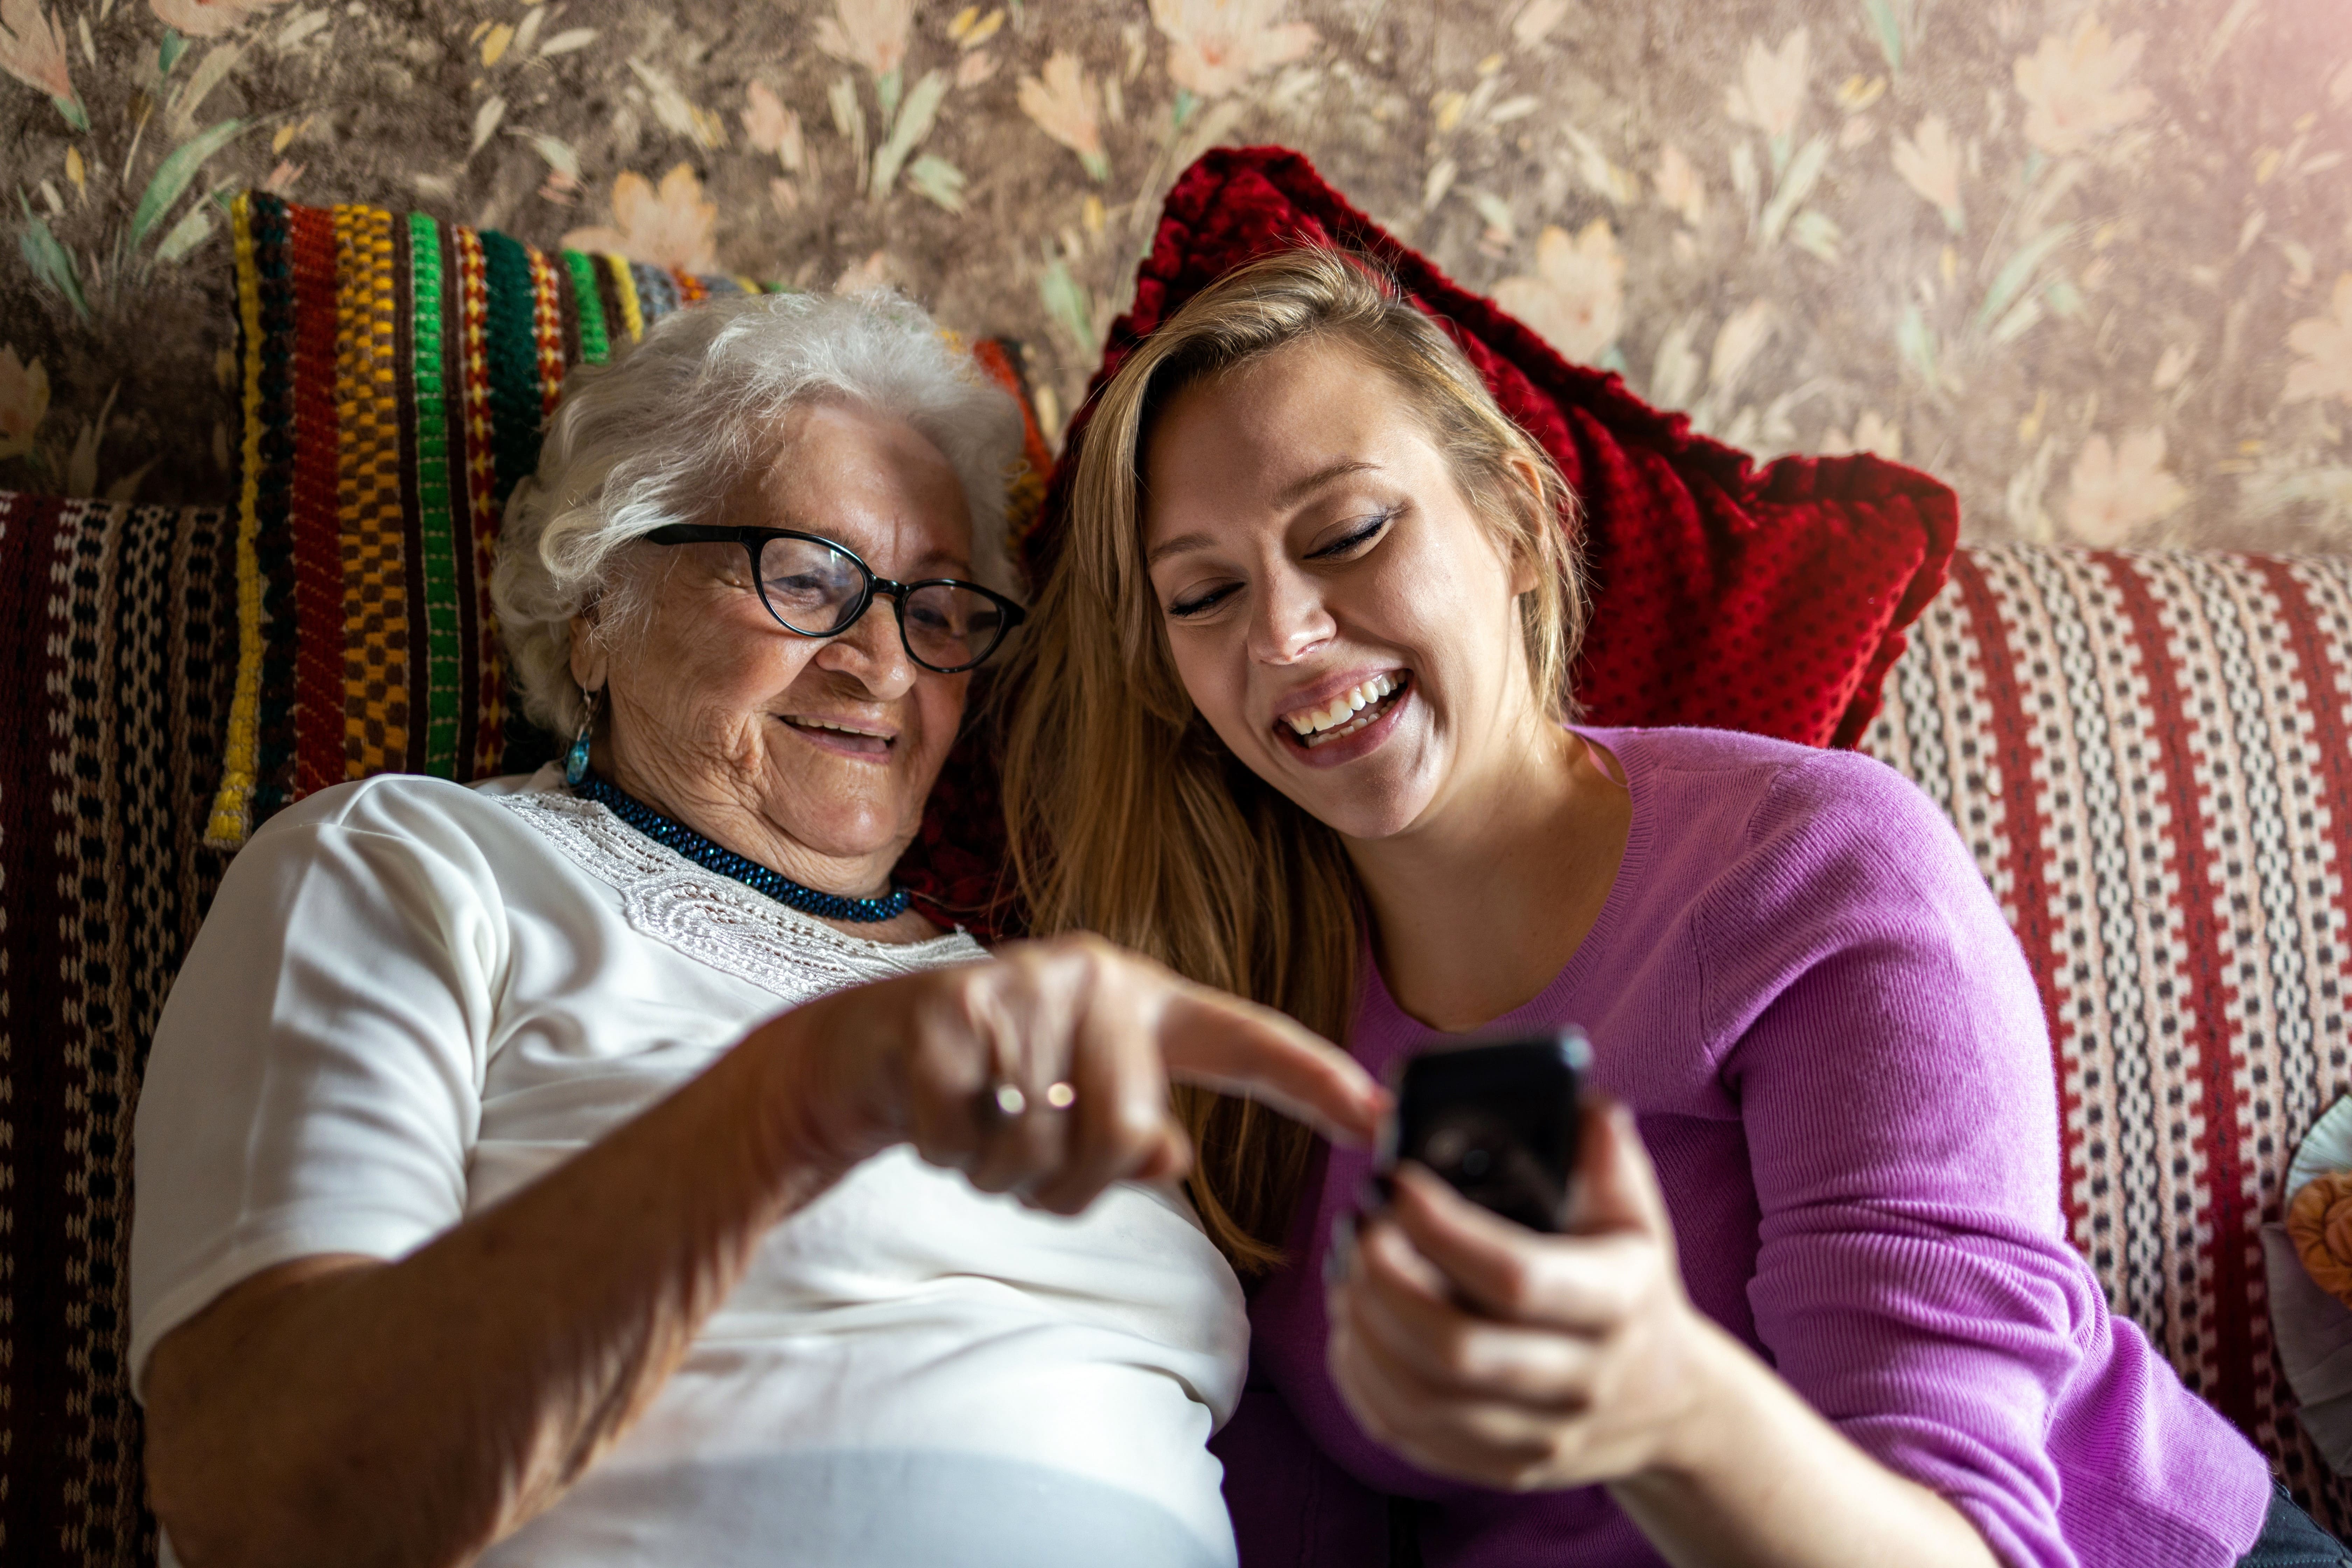 An elderly lady at her home with her female carer. They are both looking at a phone and smiling